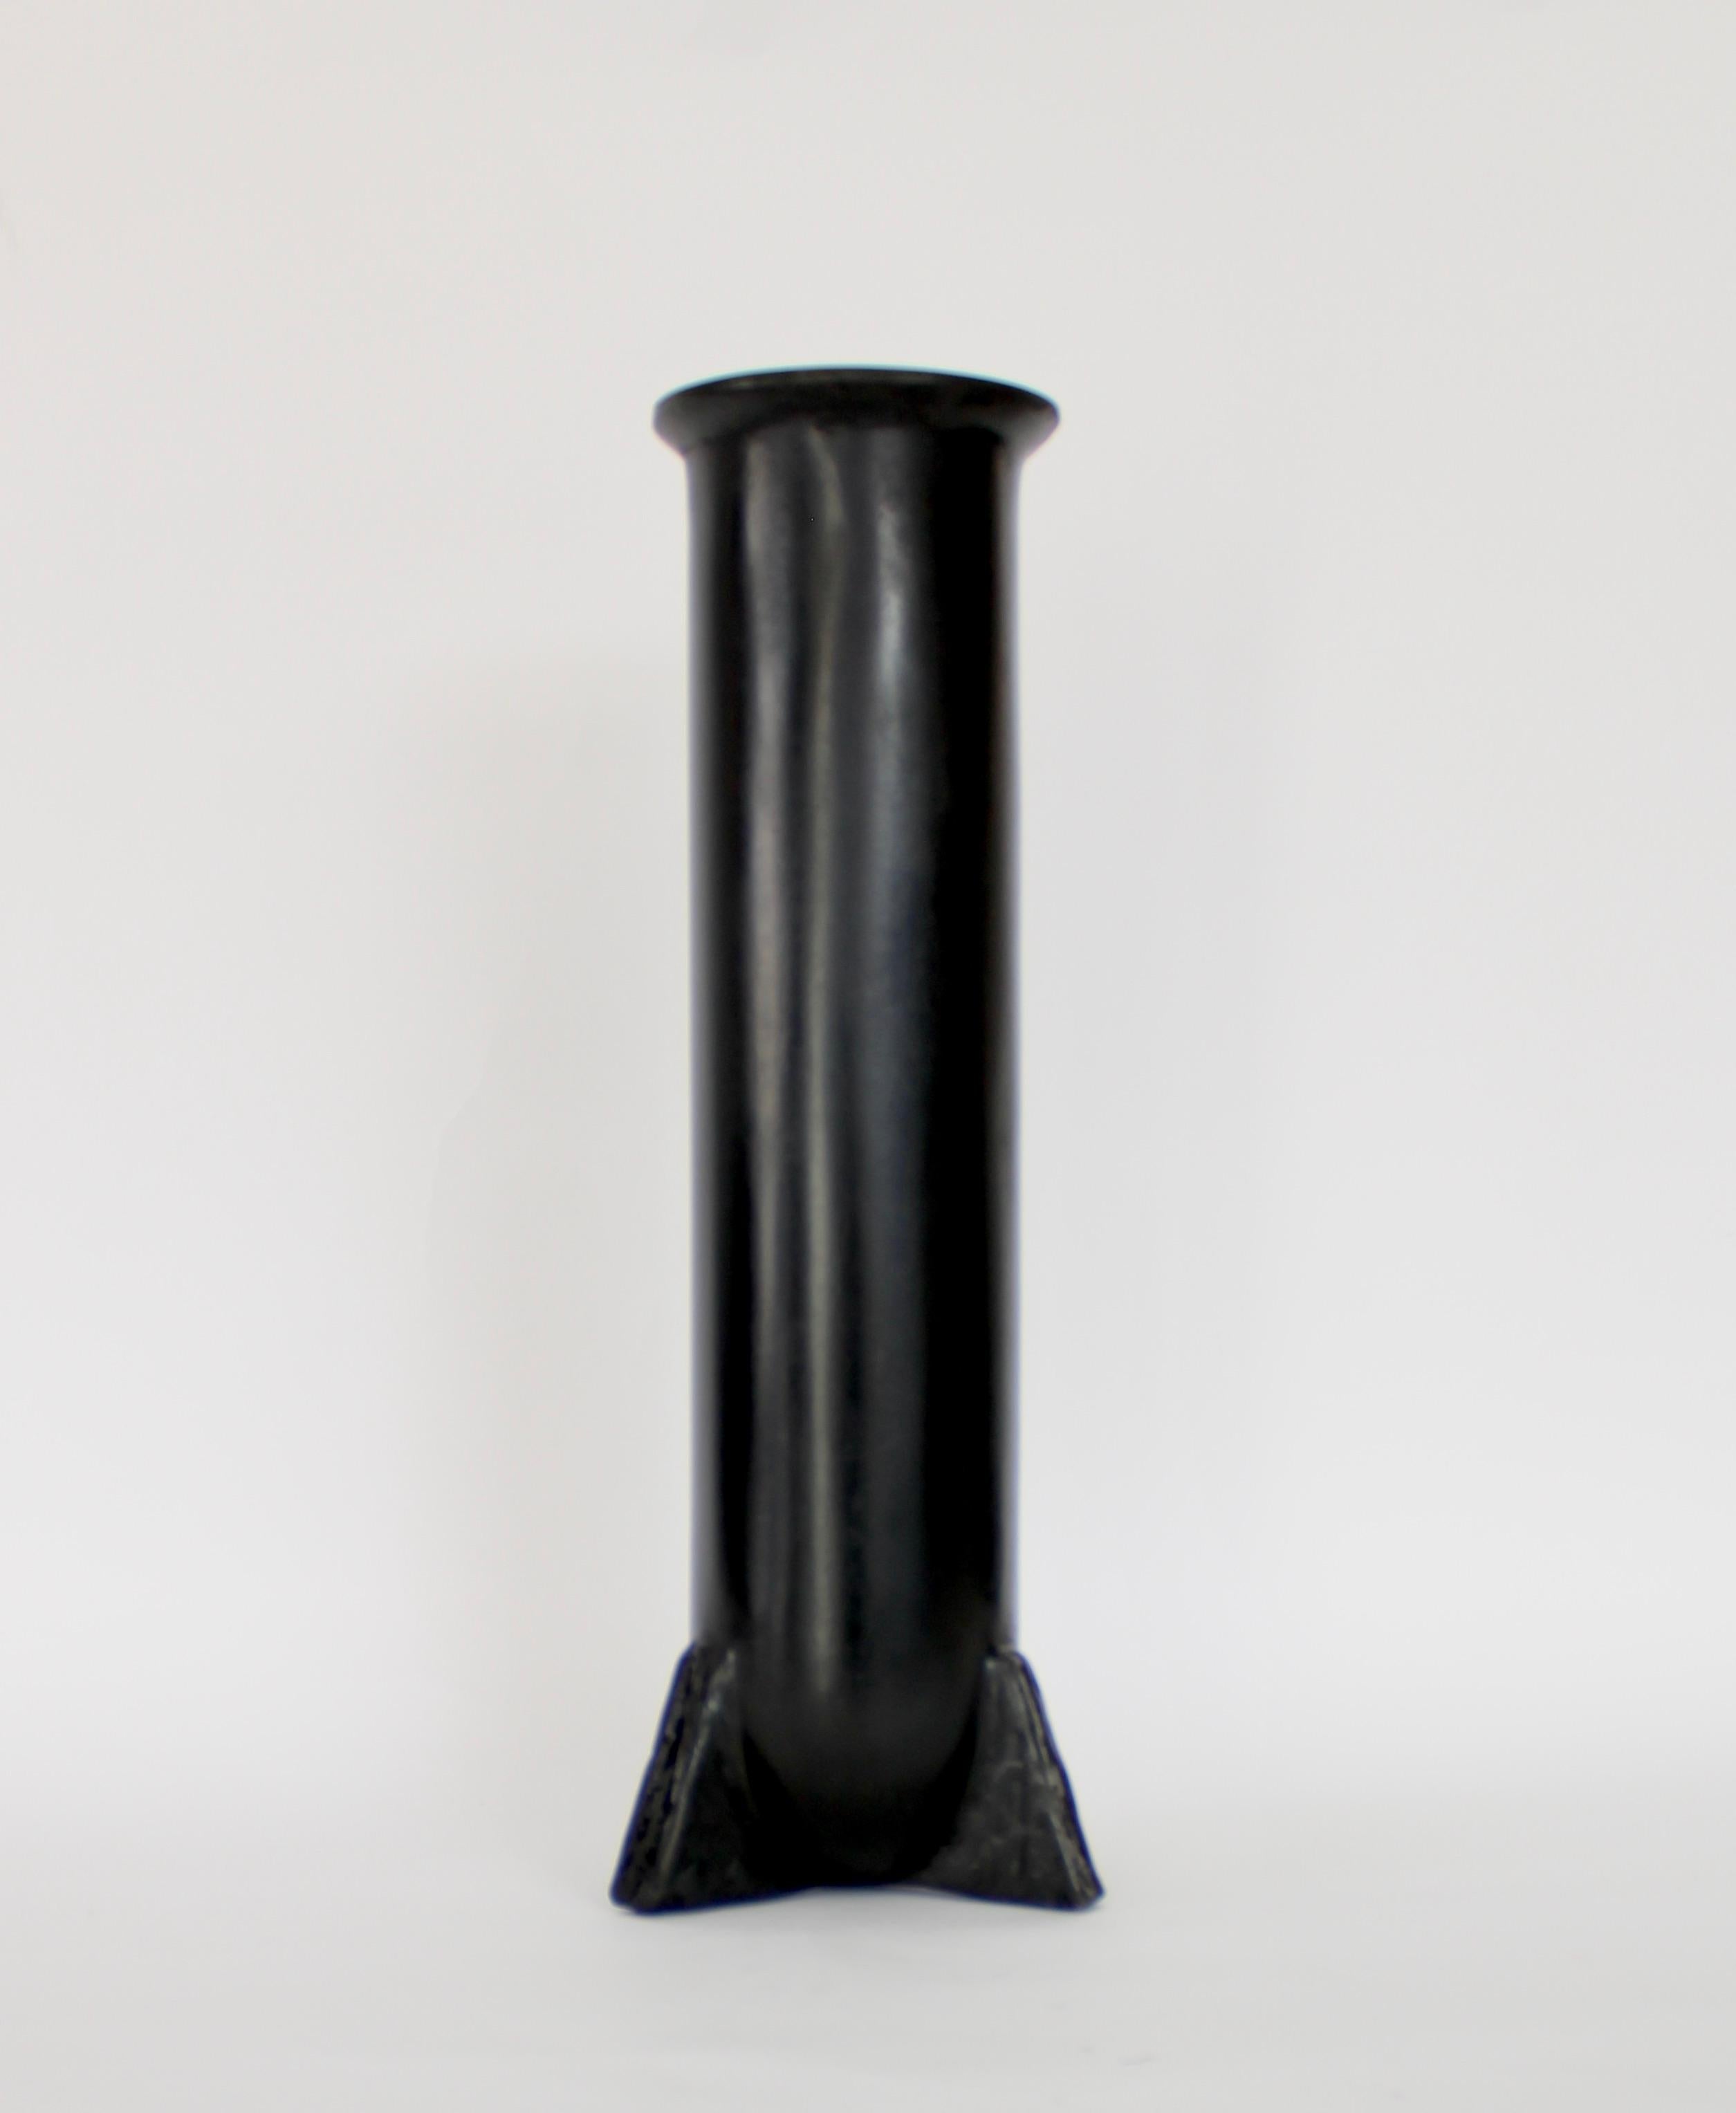 The Urnette vase from the Rick Owens bronze relic collection. This Urnette vase is featured in the black patina. Each bronze vase is signed.
Can be used as vase or sculptural object. Will hold water. Inquire as to immediate availability or by